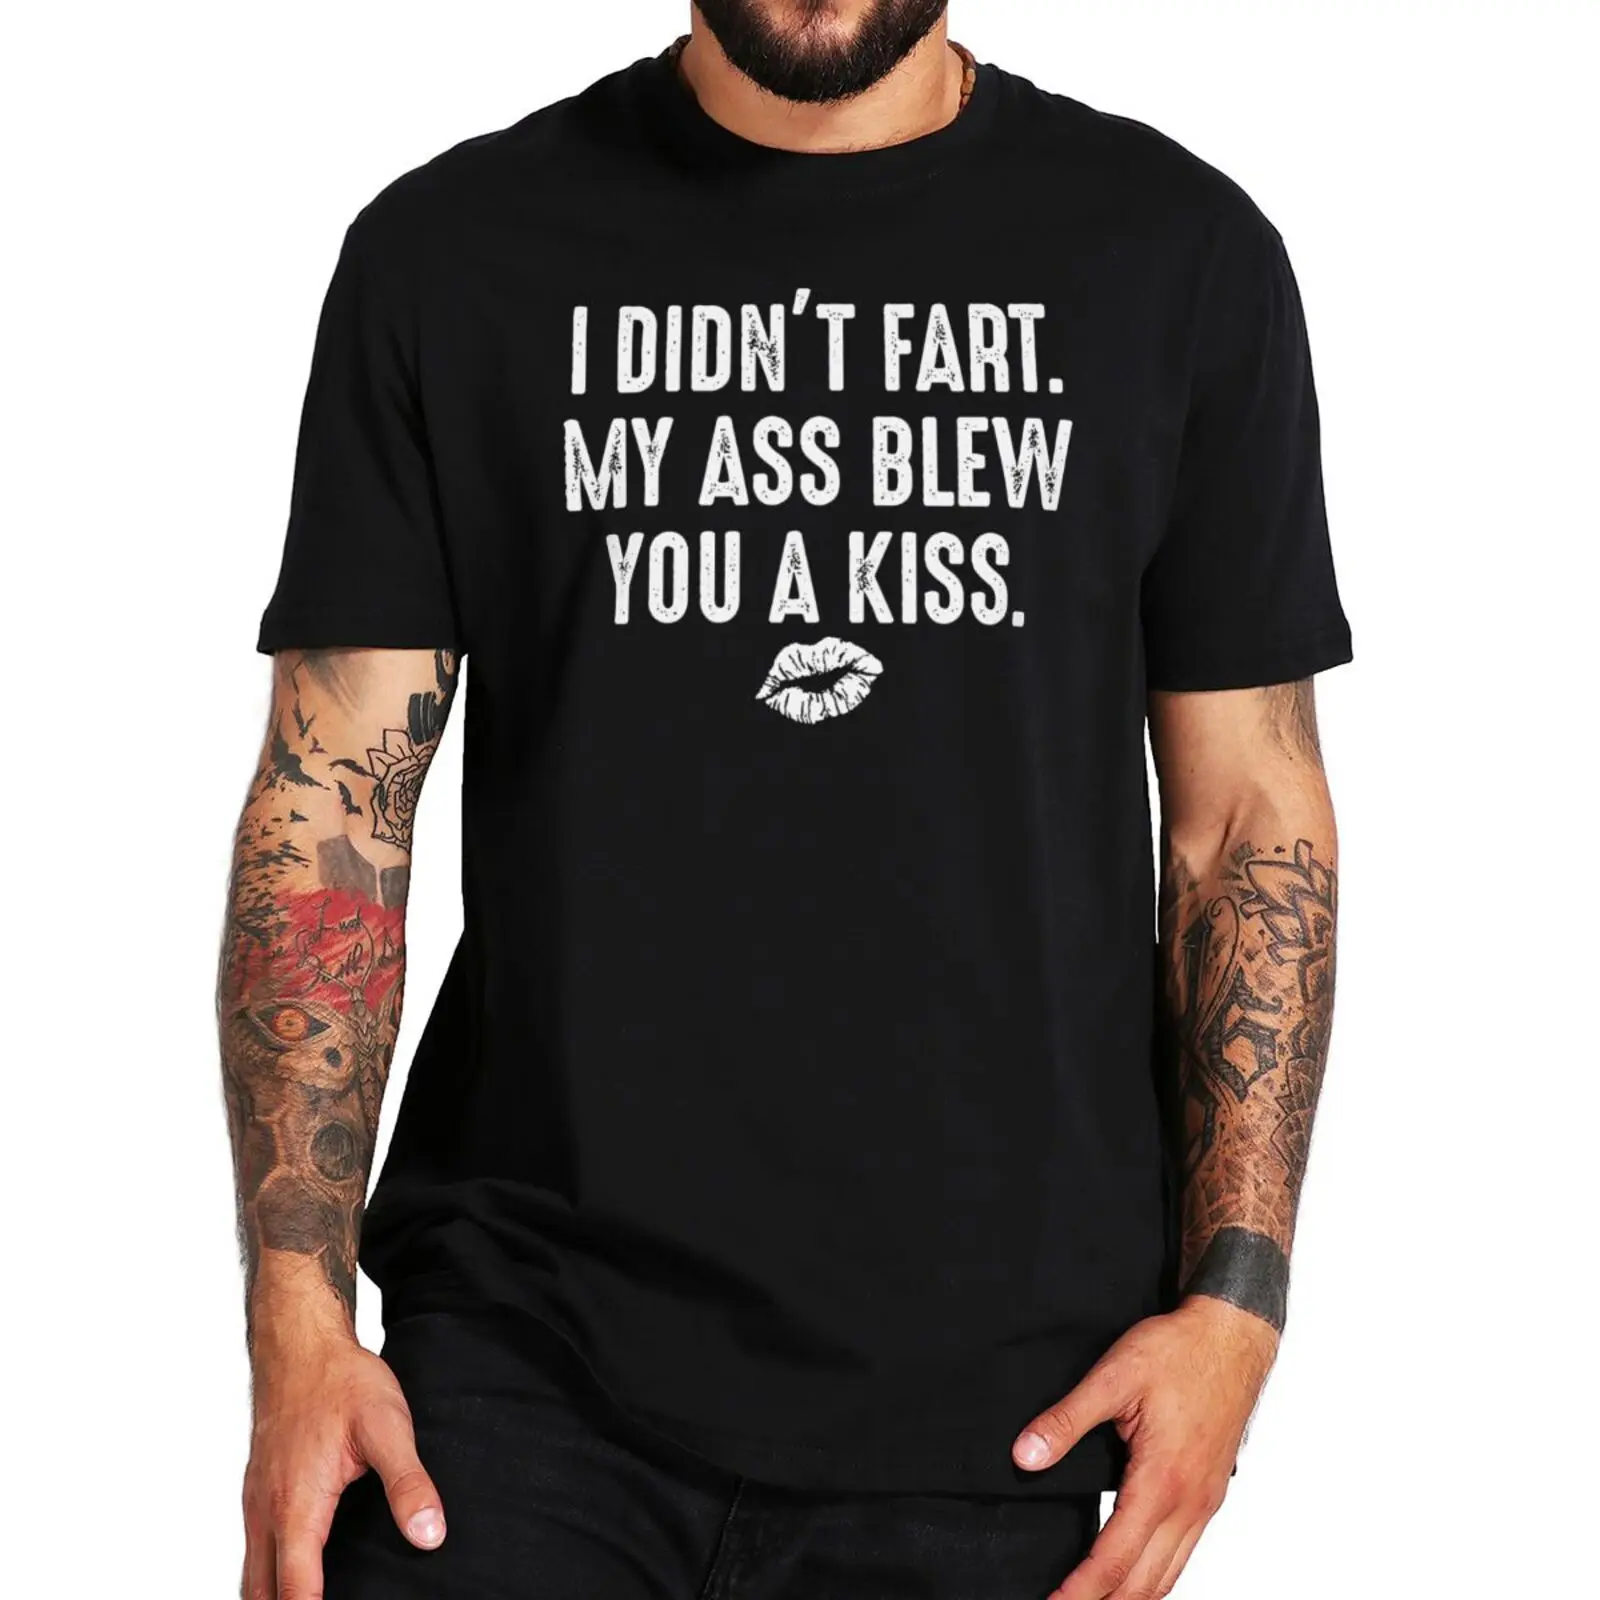 

I Didn't Fart My Ass Blew You A Kiss T Shirt Sarcastic Funny Quote 2022 Trending Humor Tshirt 100% Cotton Oversize Camiseta